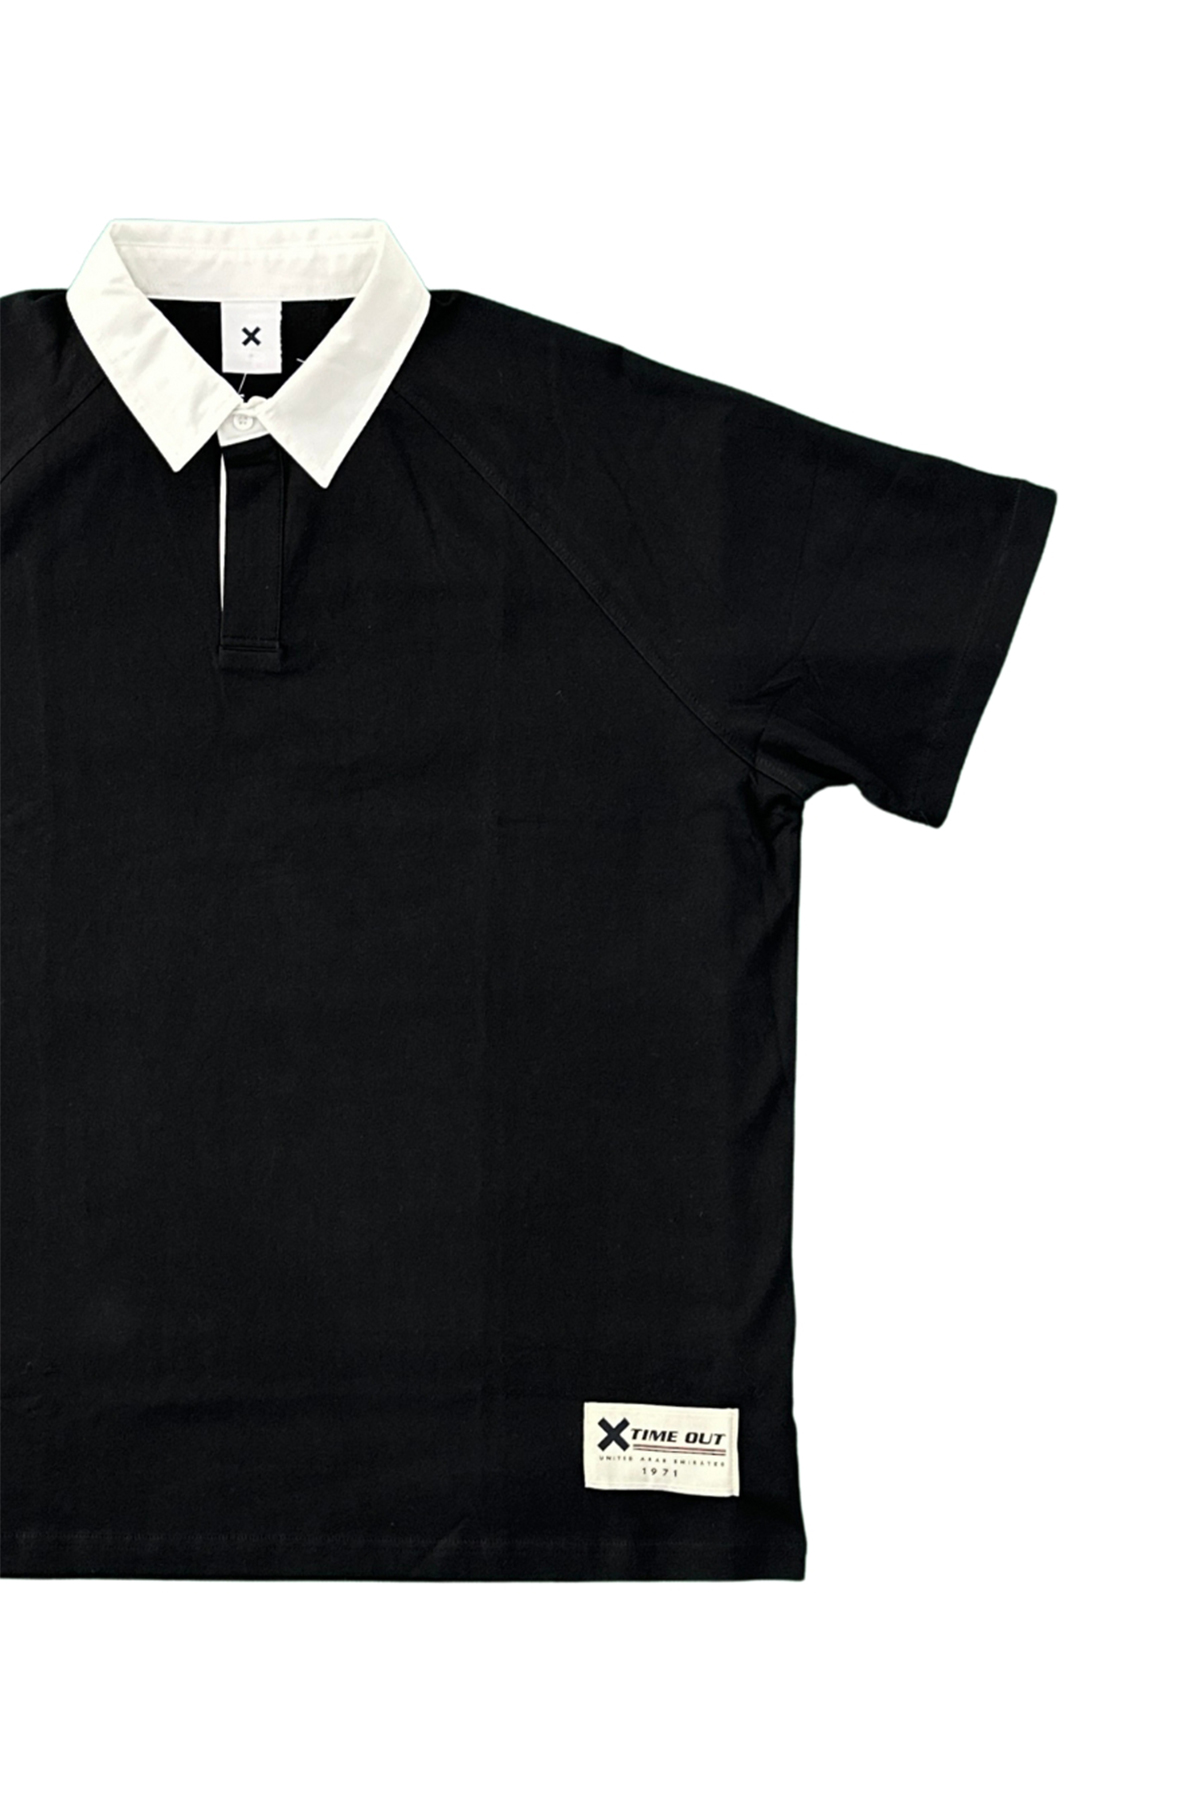 Classic-Black-and-White-Polo-Tee-black-side